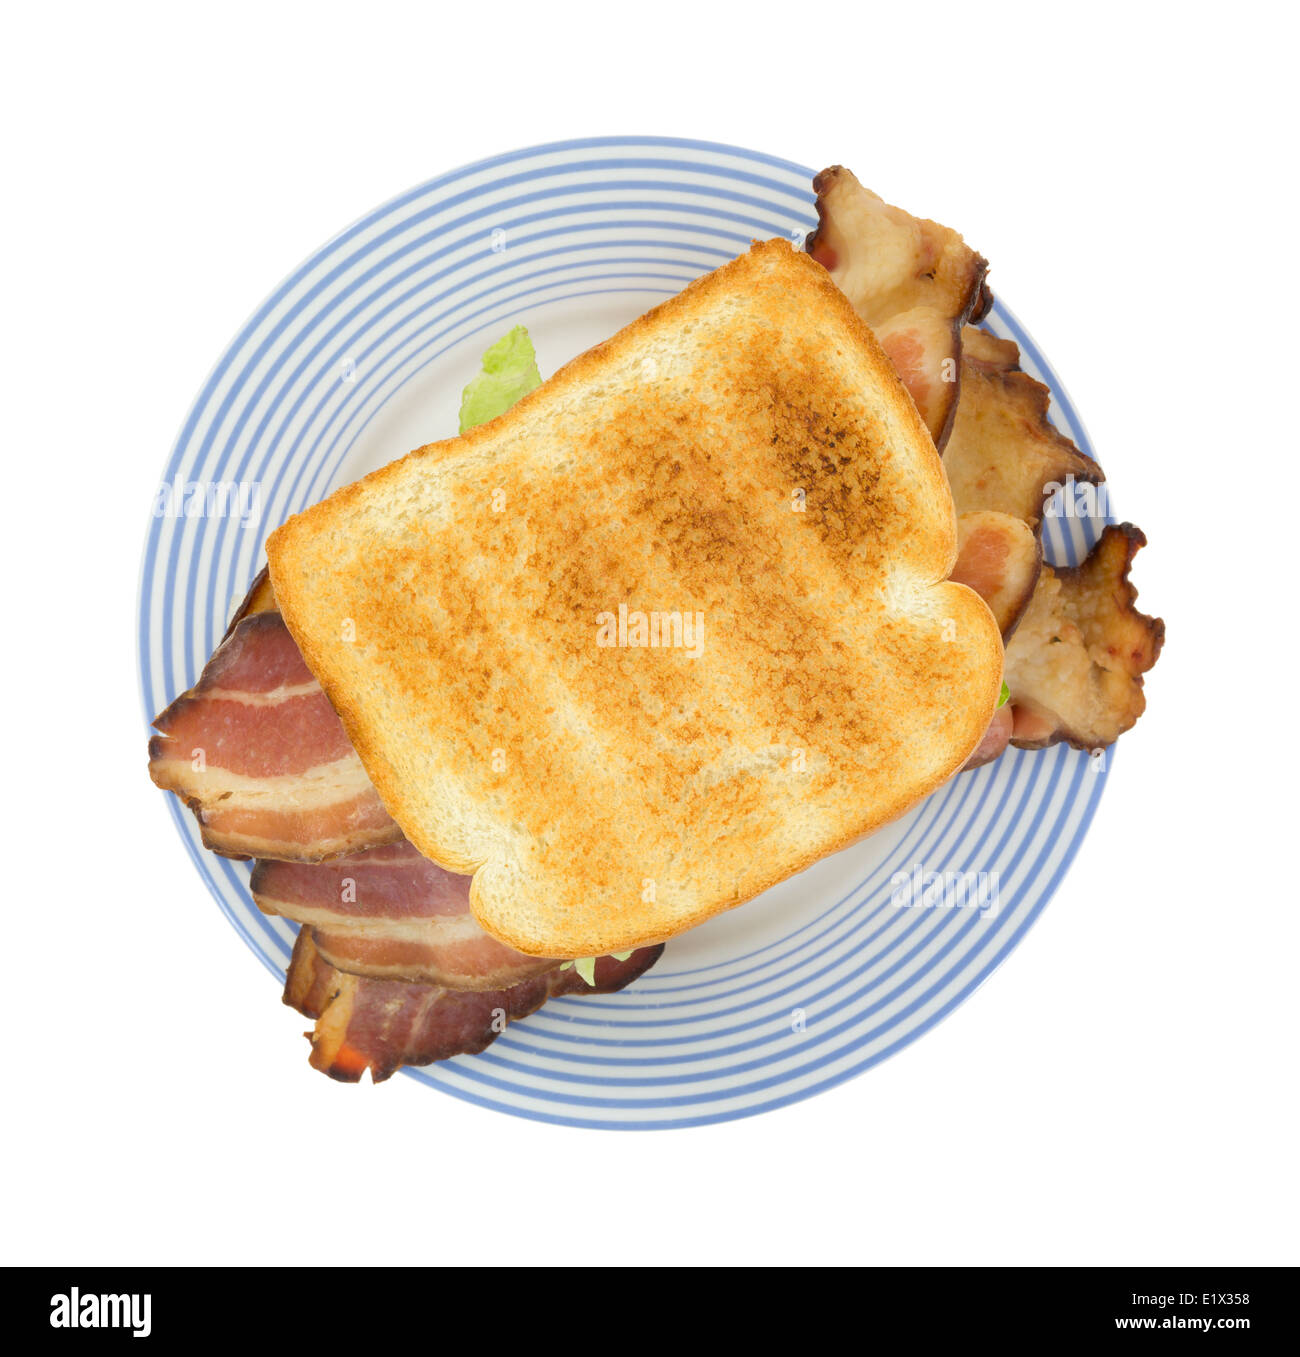 Top view of a large bacon sandwich with lettuce on an old blue striped plate. Stock Photo